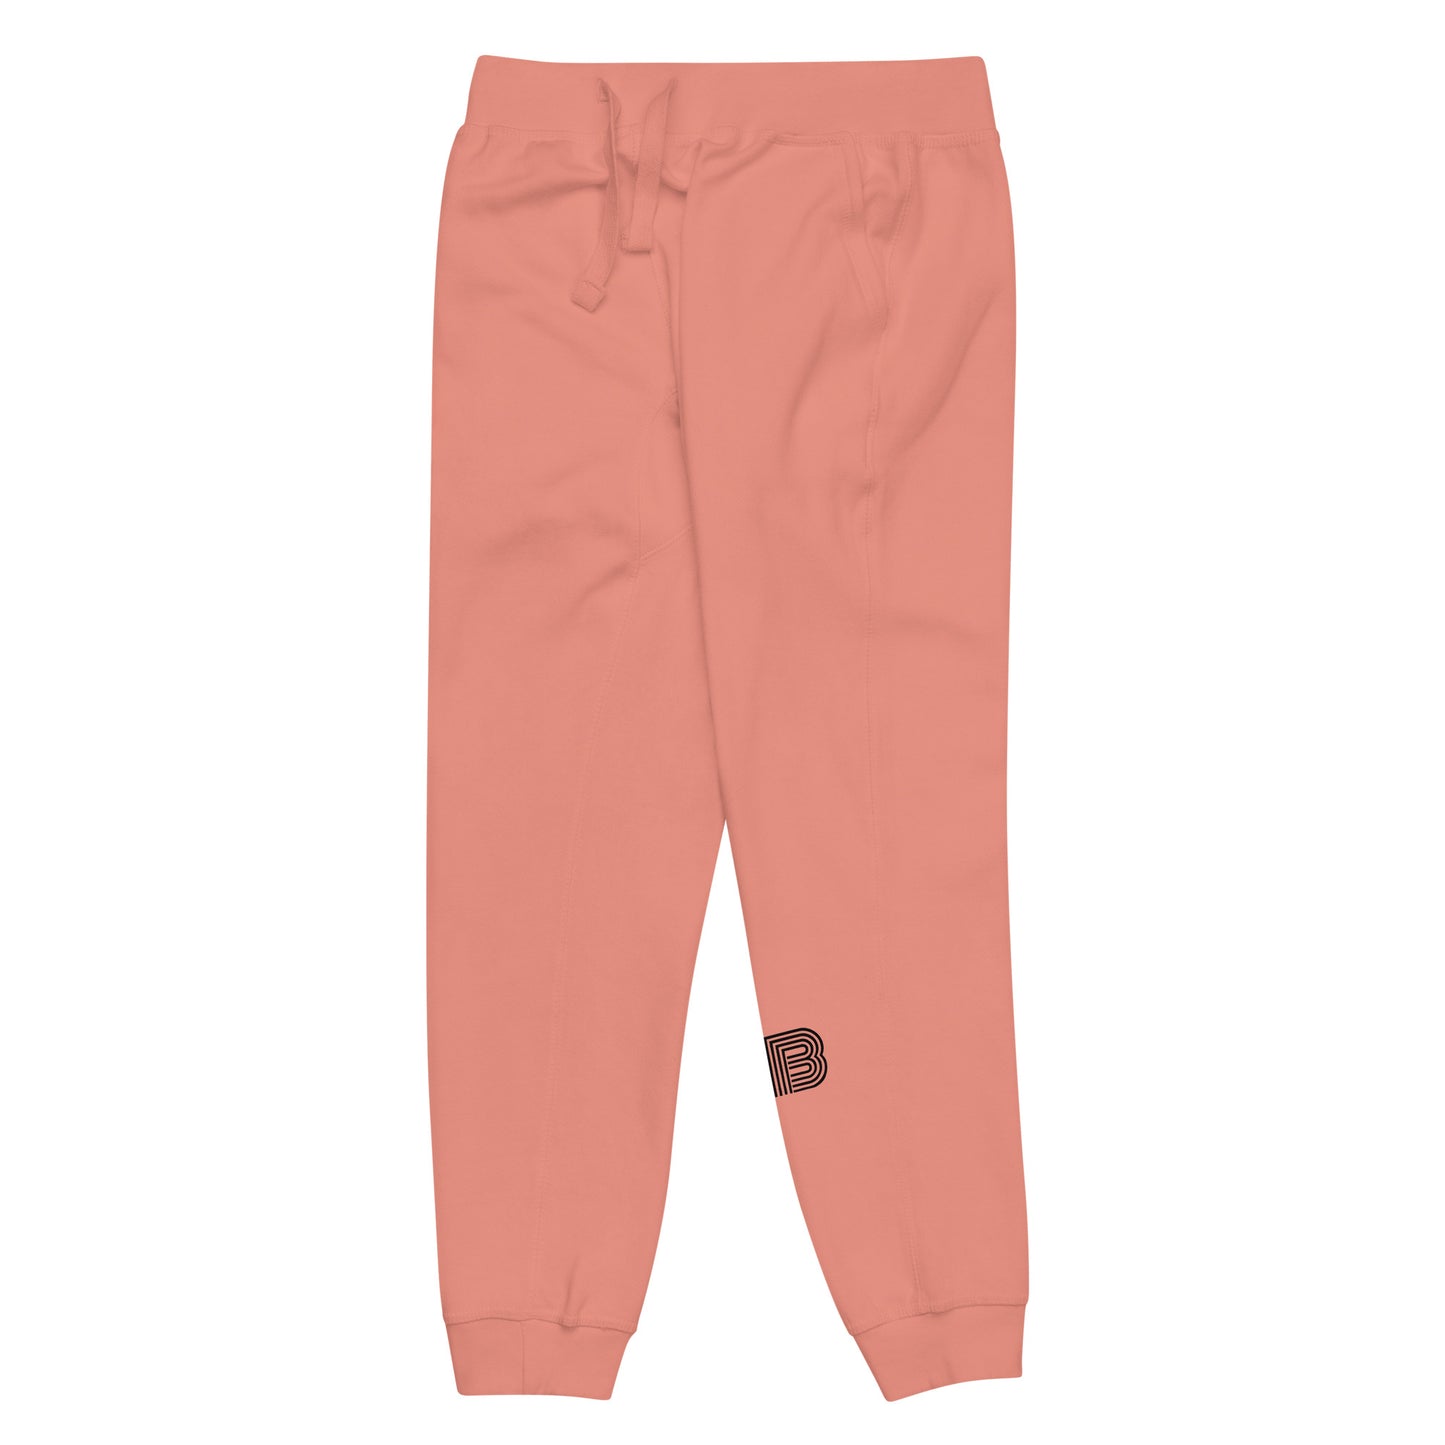 Classic RB "Dusty Rose" Joggers